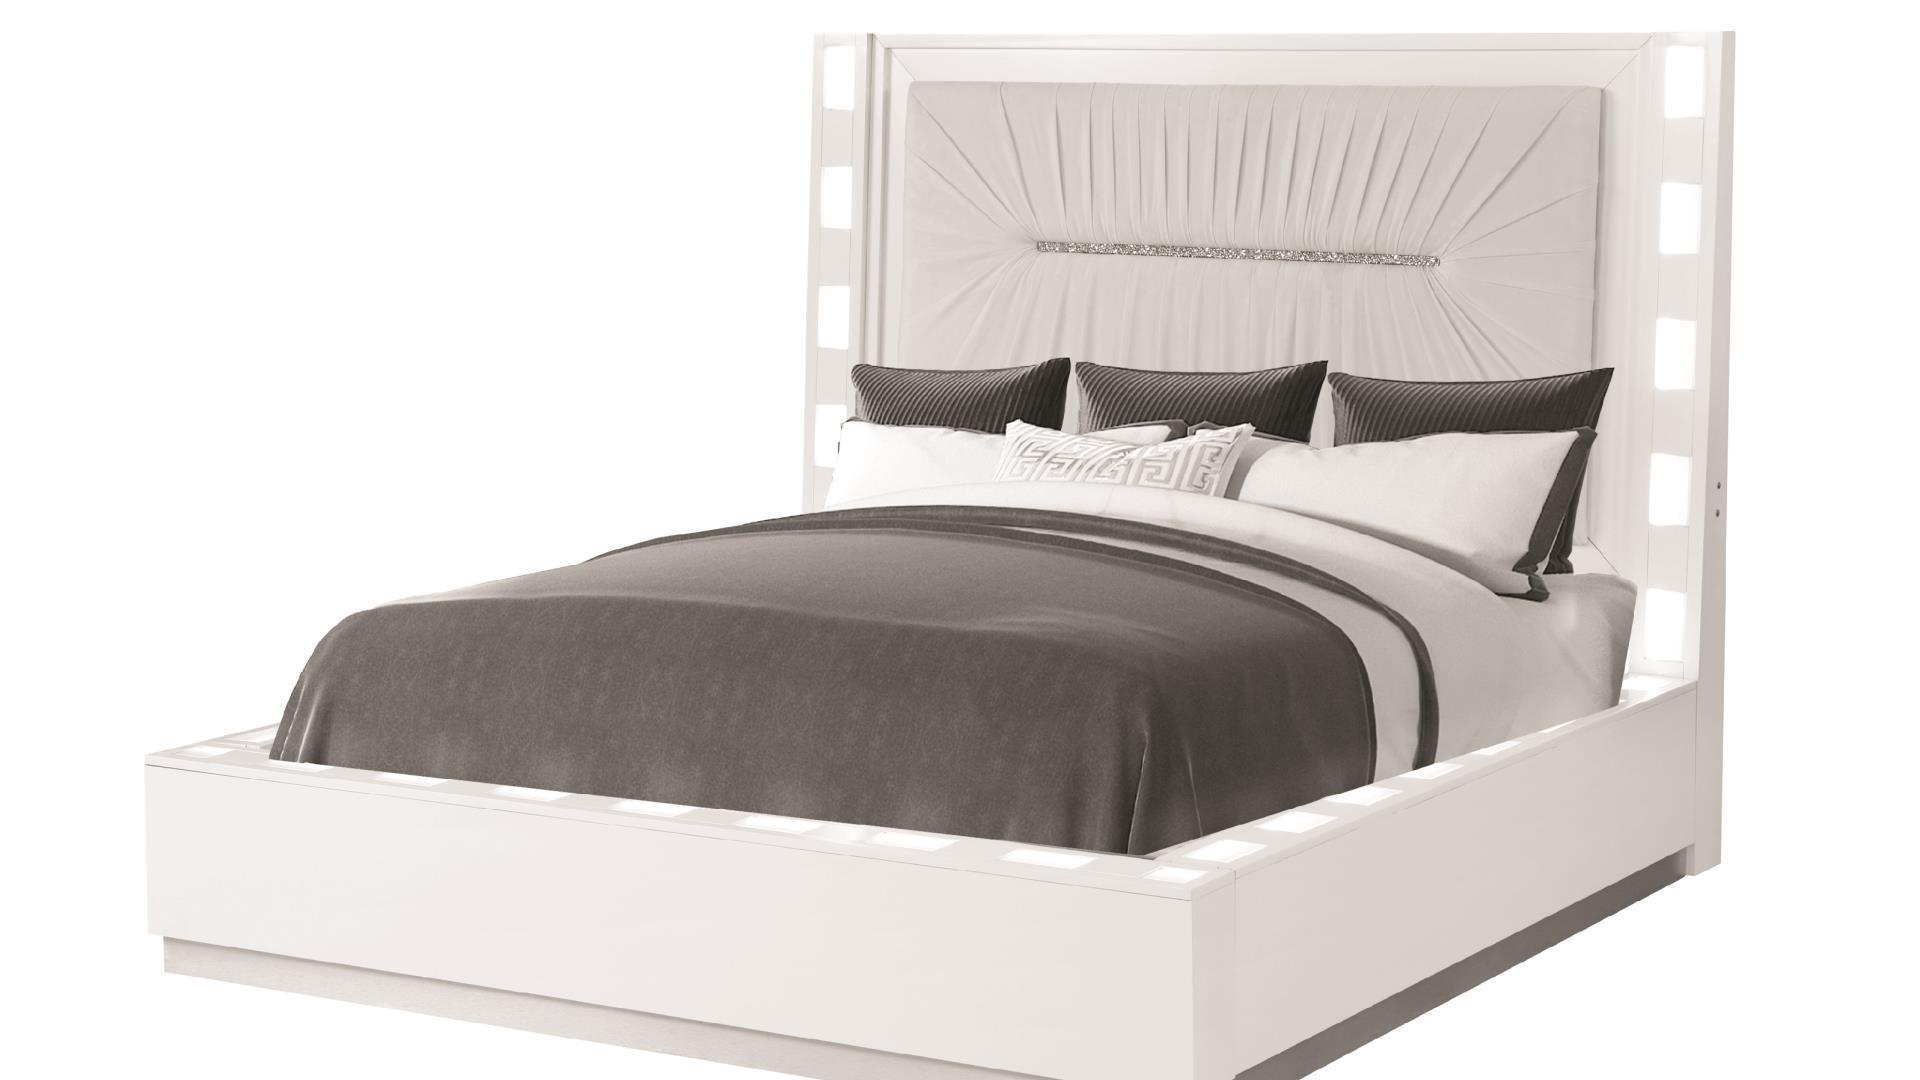 

    
Milky White Solid Wood Queen Bed COCO Galaxy Home Modern Contemporary
